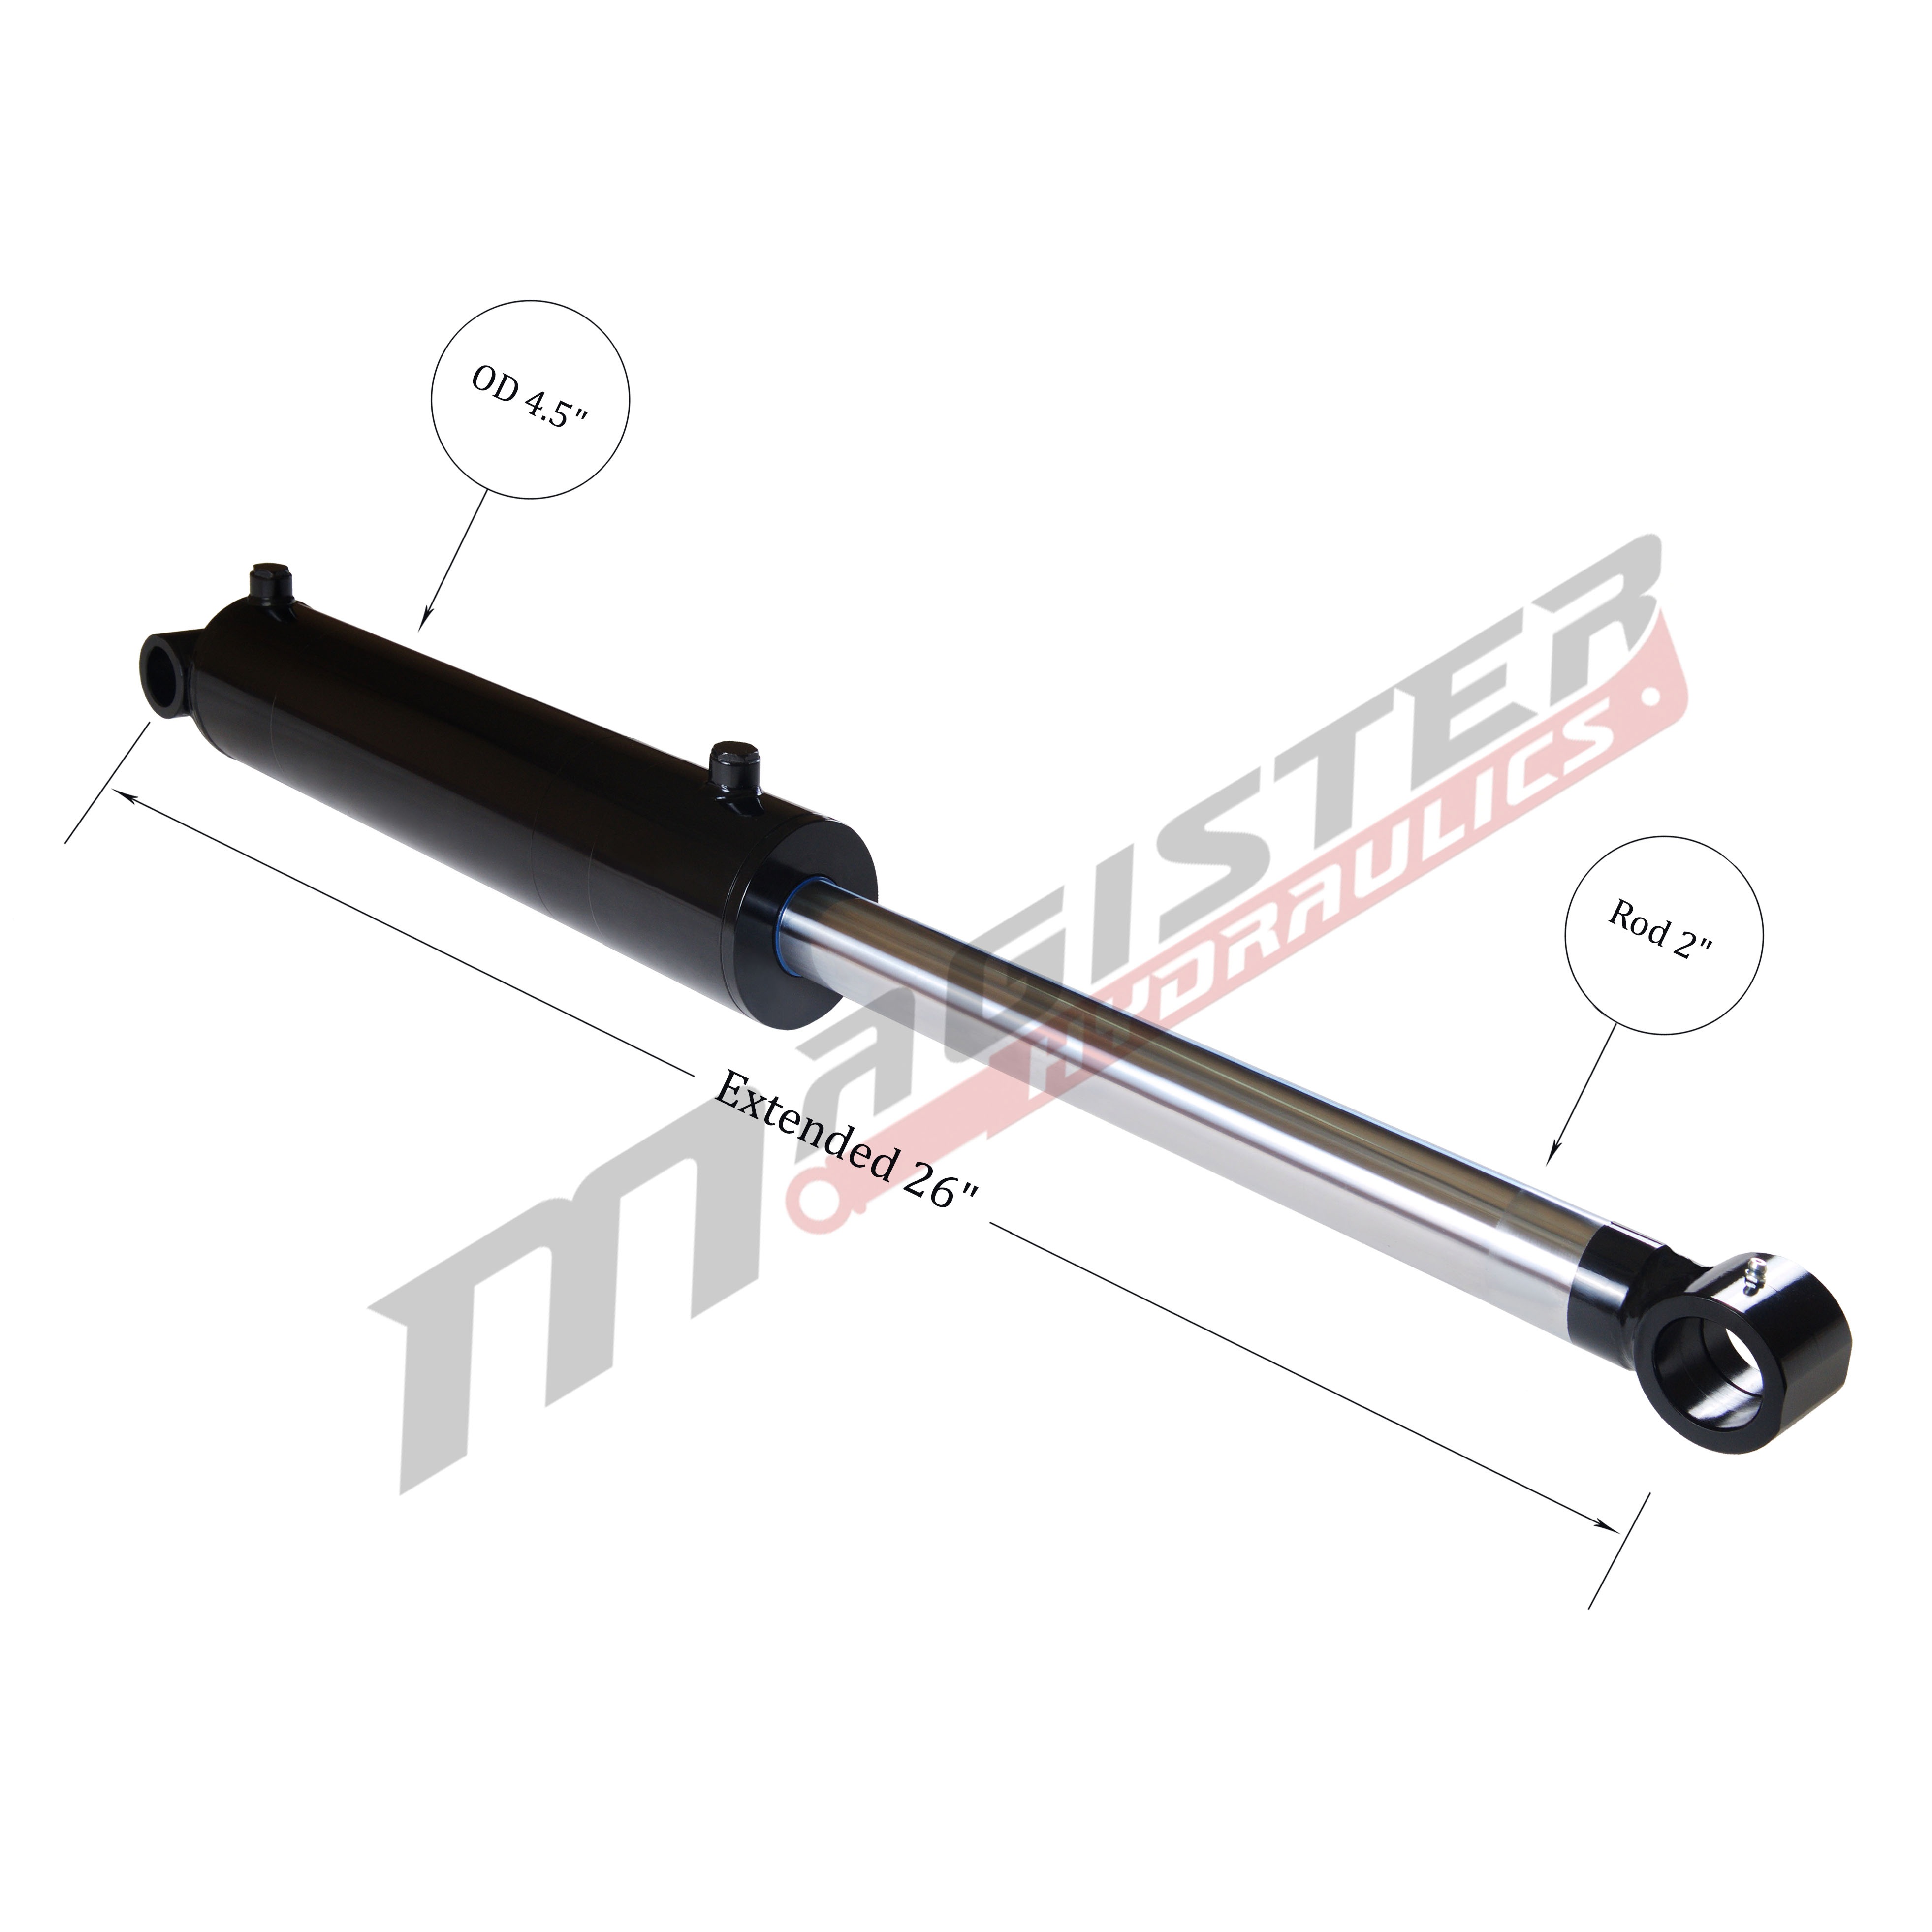 4 bore x 8 stroke hydraulic cylinder, welded cross tube double acting cylinder | Magister Hydraulics